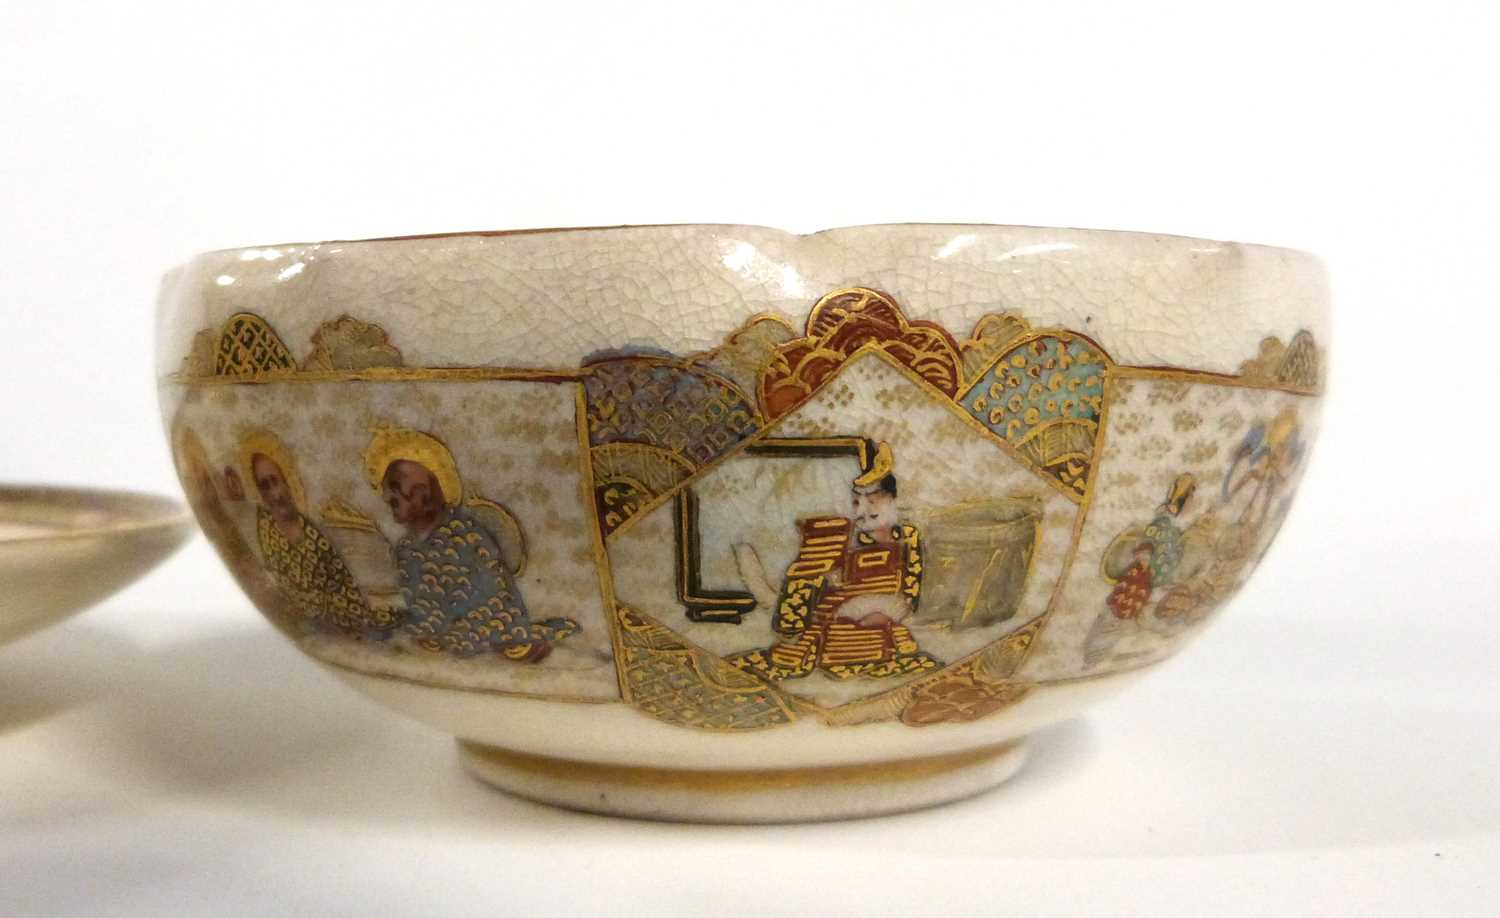 A 20th Century Cantonese porcelain bowl with typical polychrome decoration of flowers and figures - Image 12 of 15